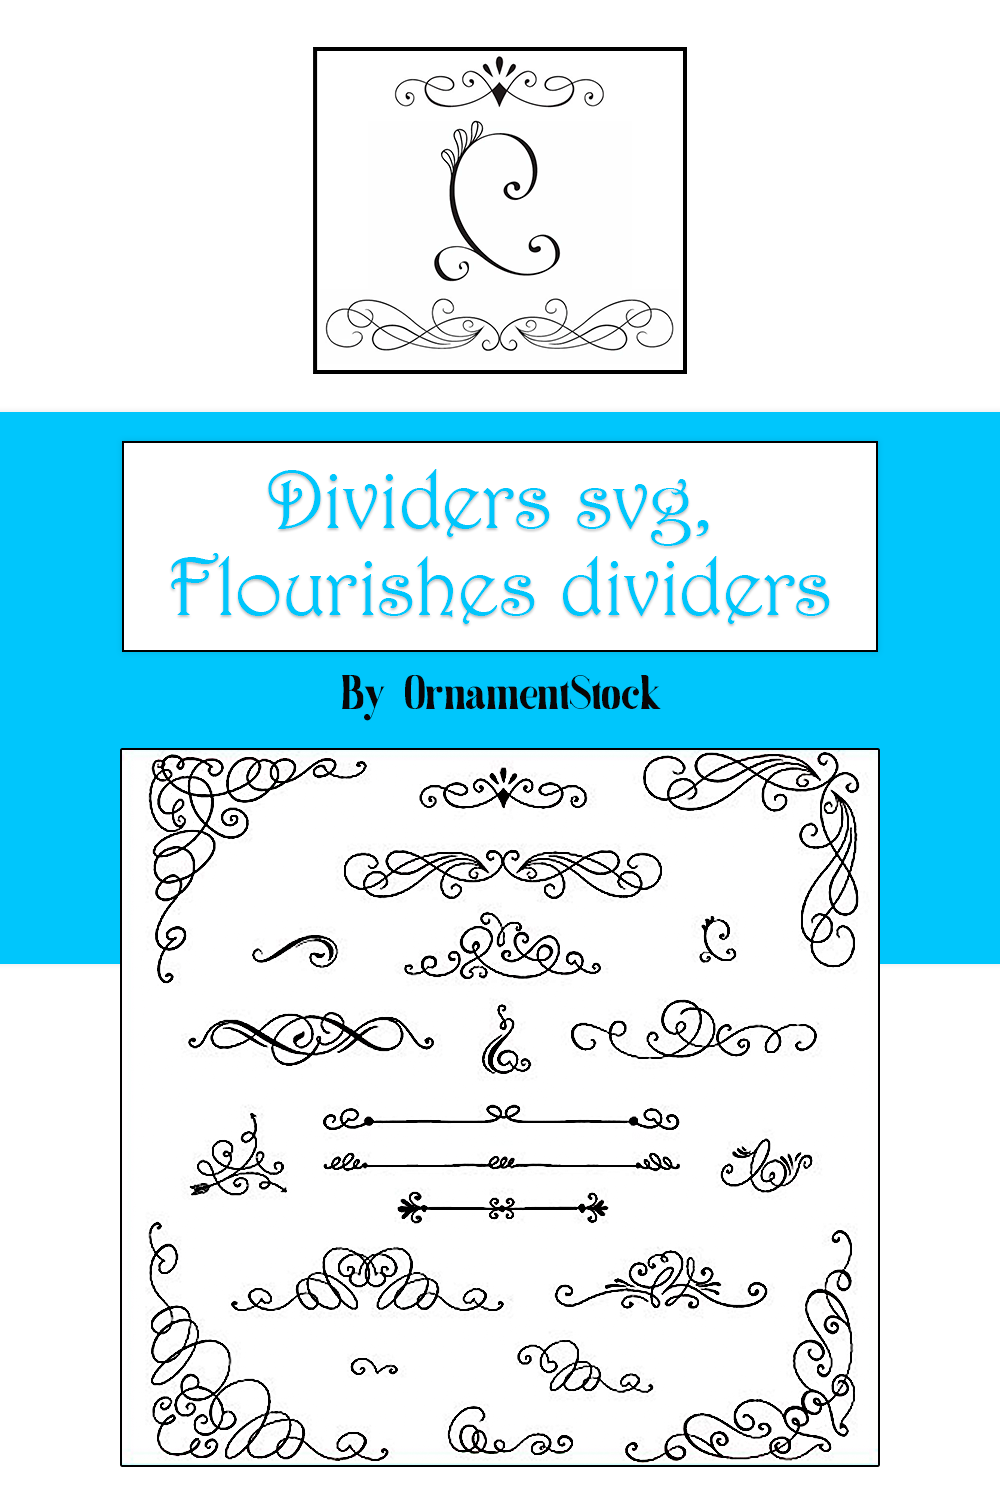 Dividers flourishes dividers of pinterest.